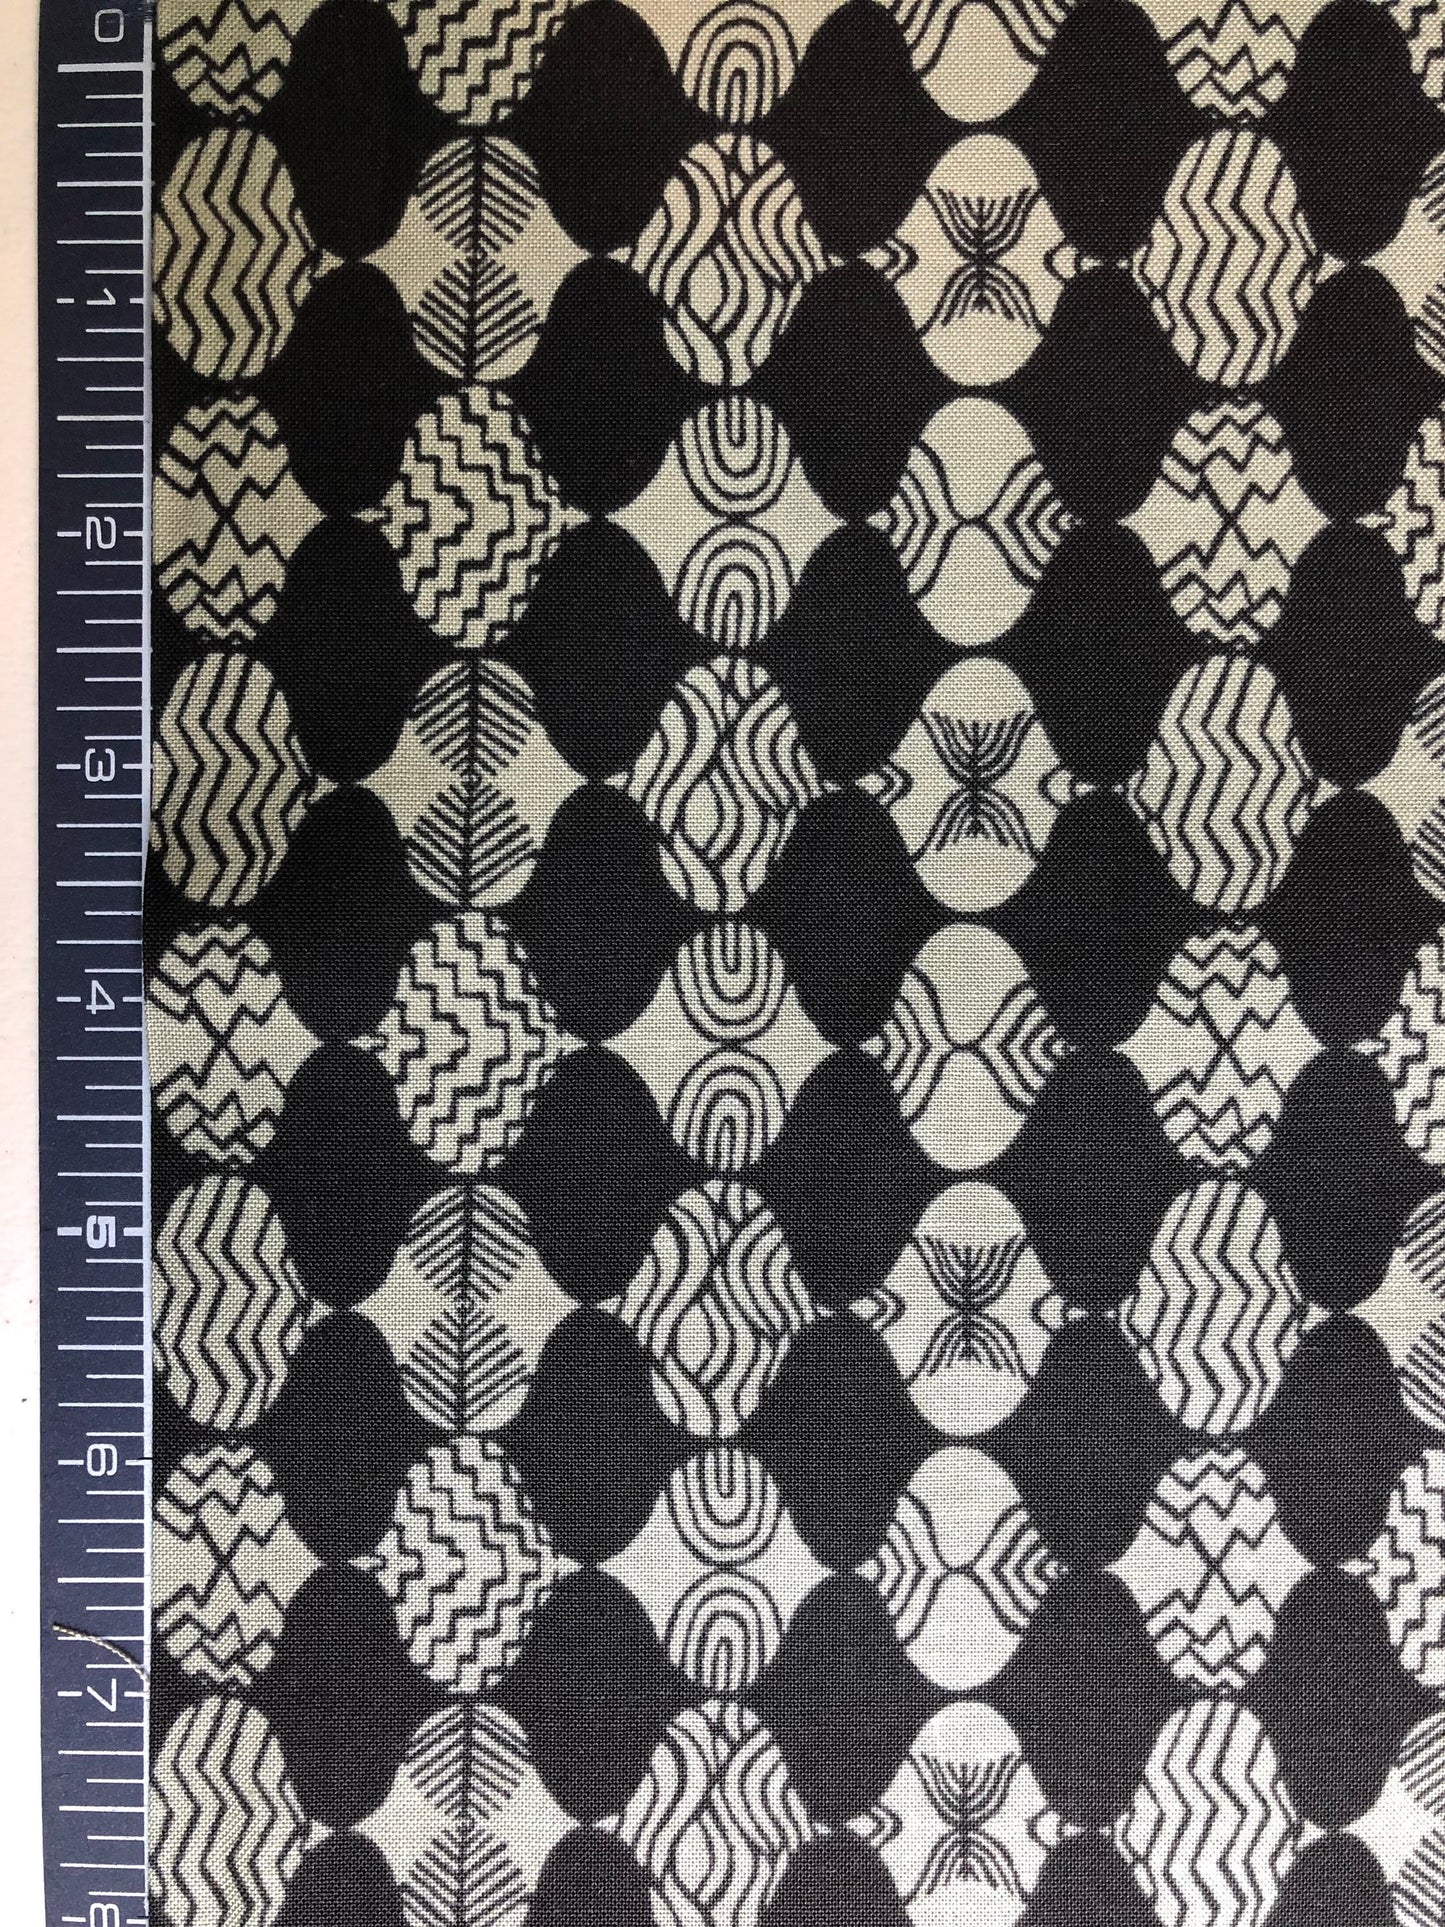 Parson Gray CURIOUS NATURE Empire Mark in Tailcoat PWPG003, David Butler, Quilt Fabric, Cotton Fabric, Masculine Fabric, Fabric By The Yard